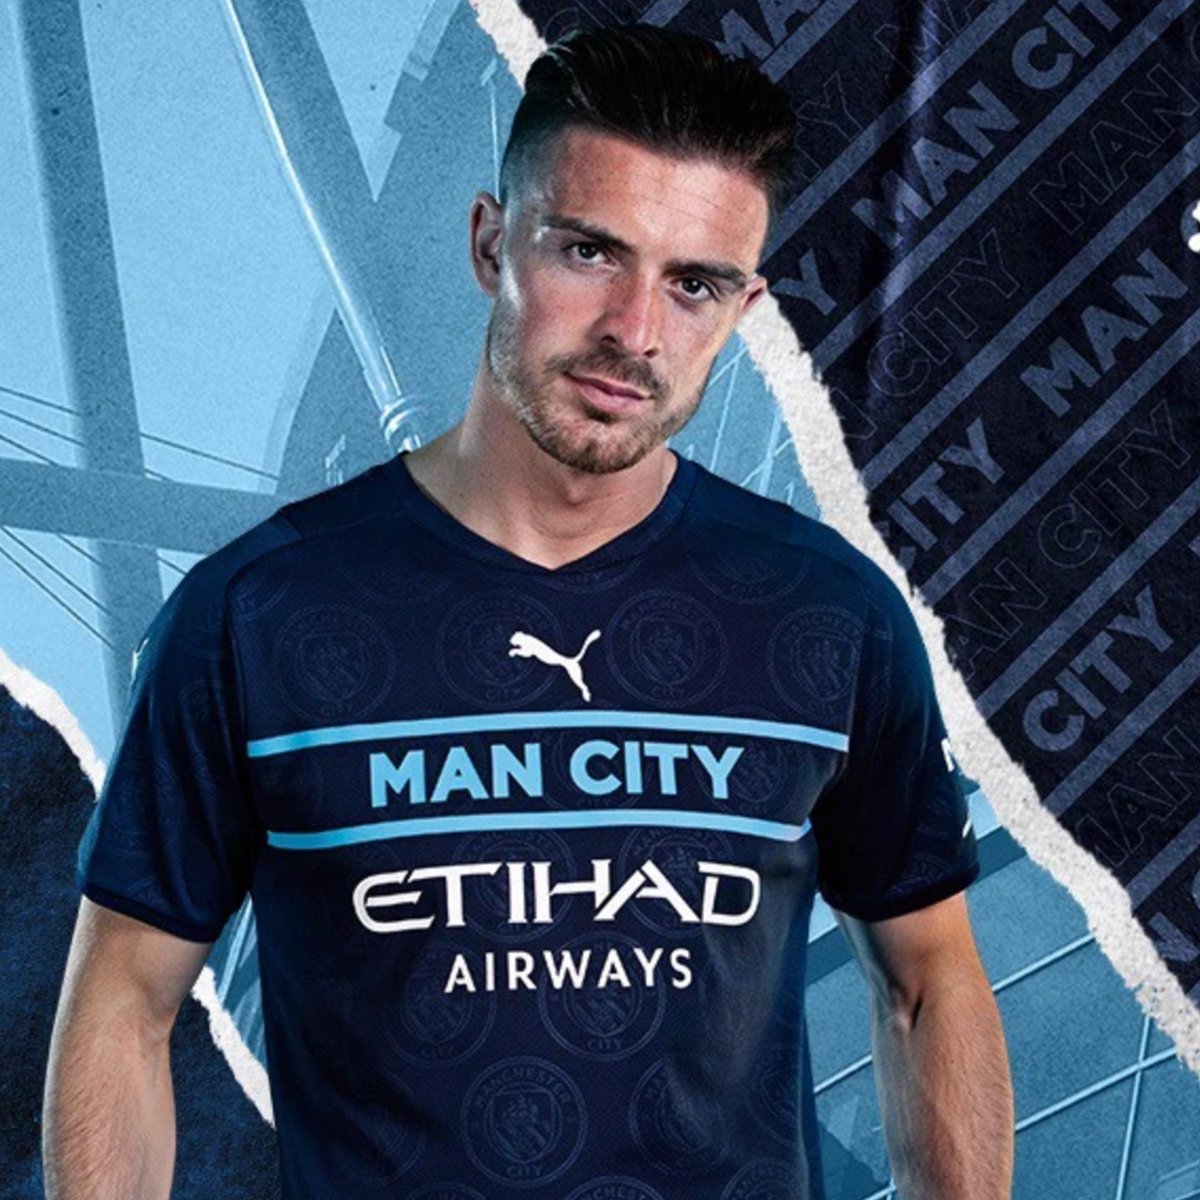 New Manchester City 3rd Kit Gets Ridiculed Social Media